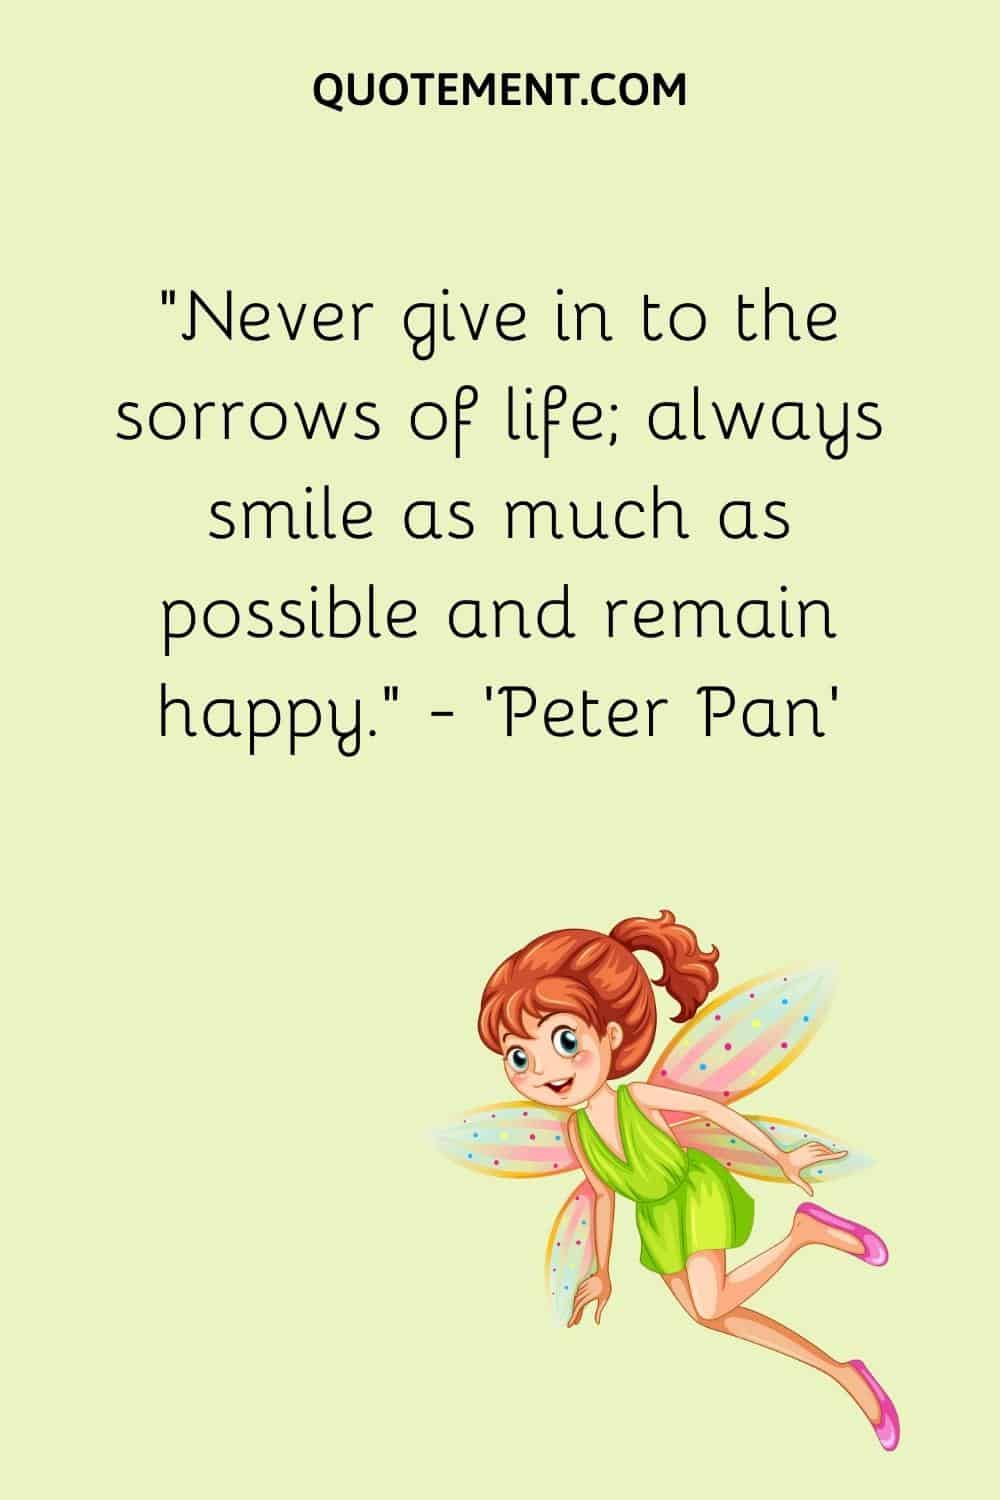 Never give in to the sorrows of life;